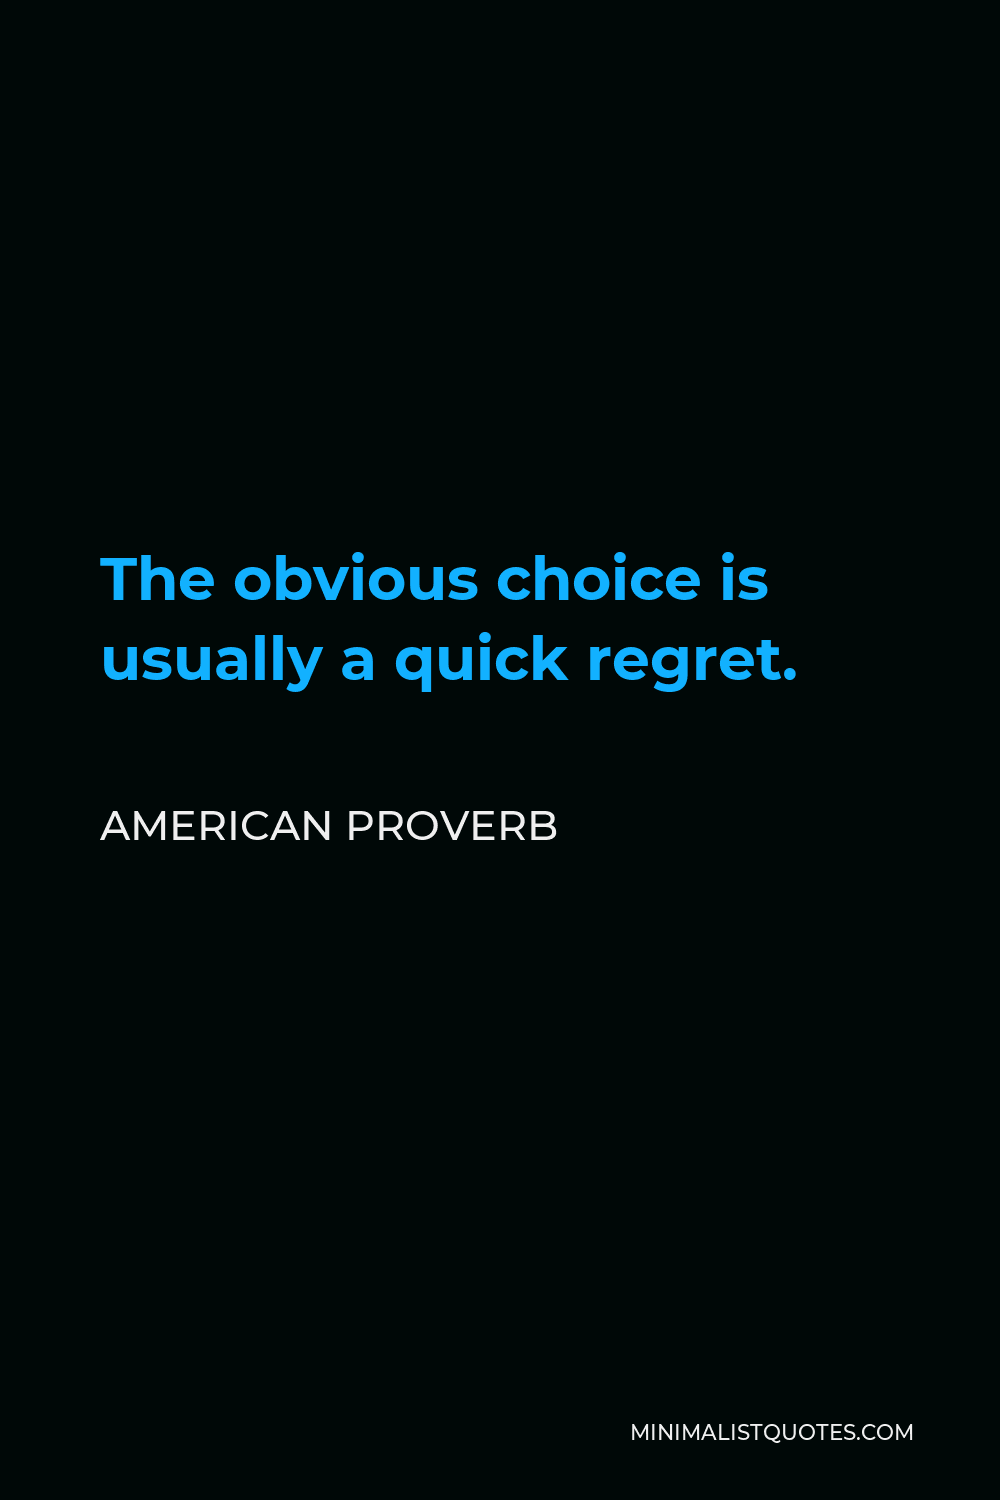 American Proverb Quote - The obvious choice is usually a quick regret.